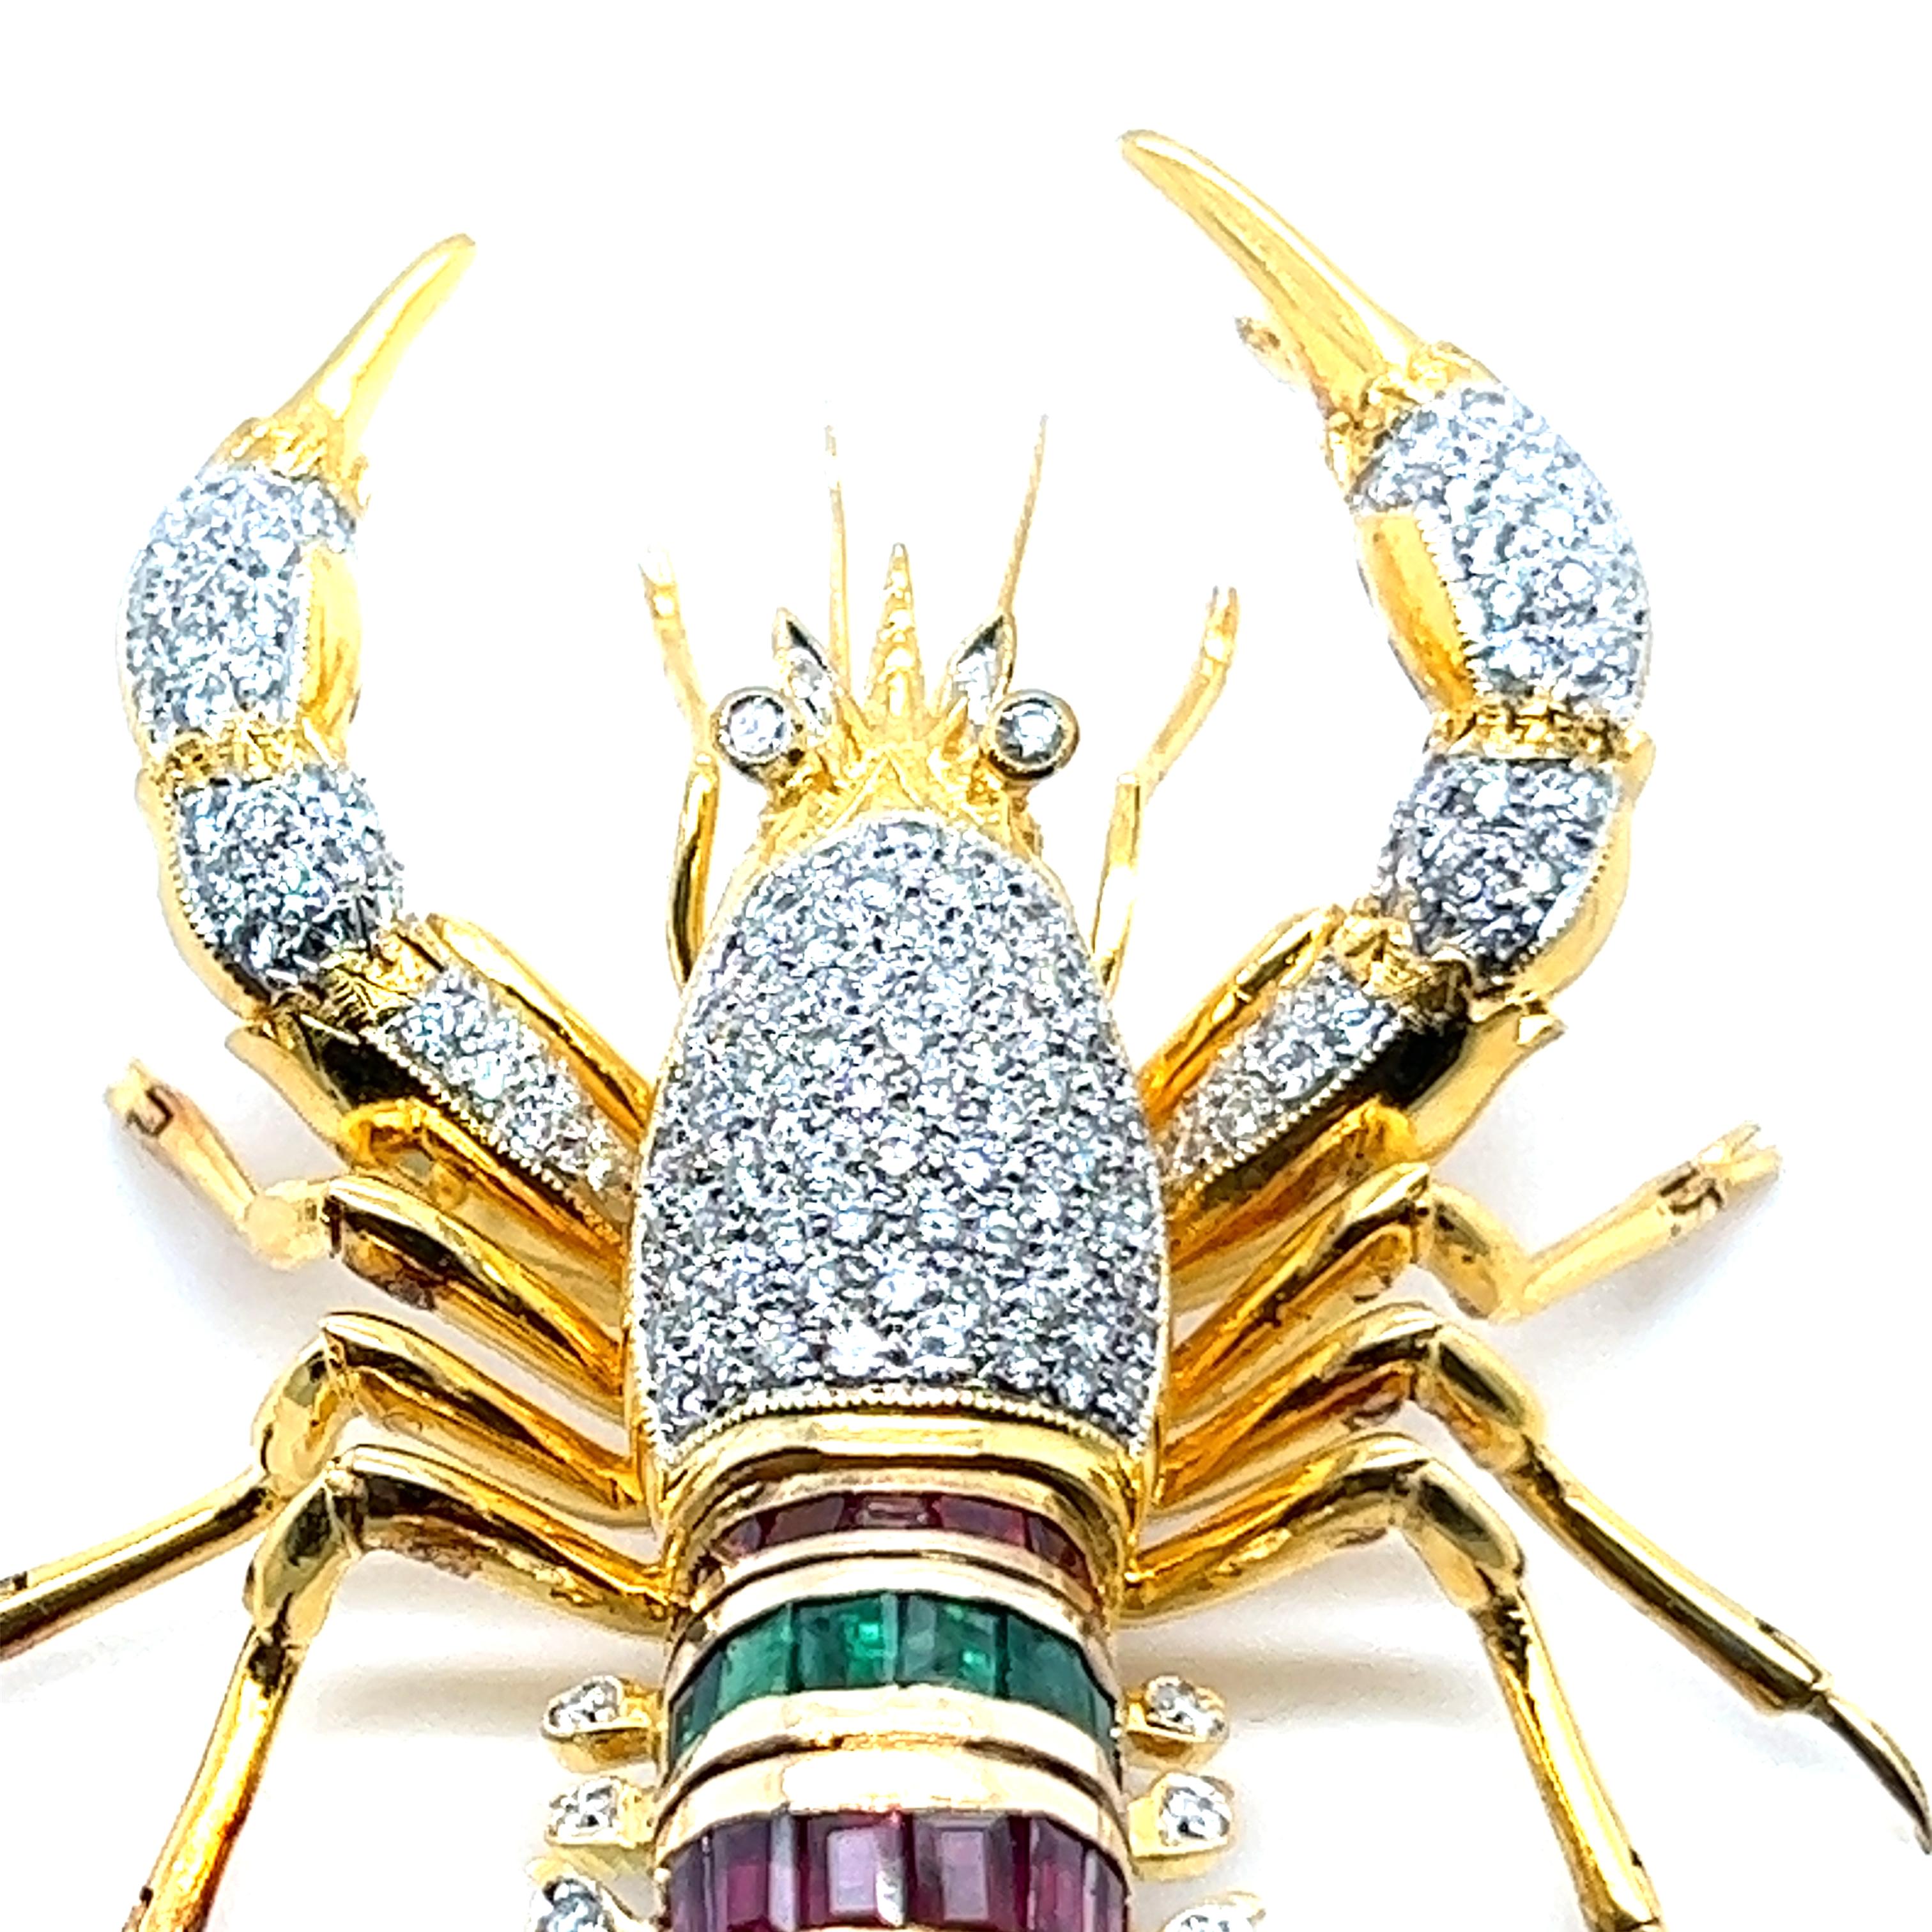 Lobster Brooch with Diamonds Rubies Emeralds & Sapphires in 18 Karat Yellow Gold 2